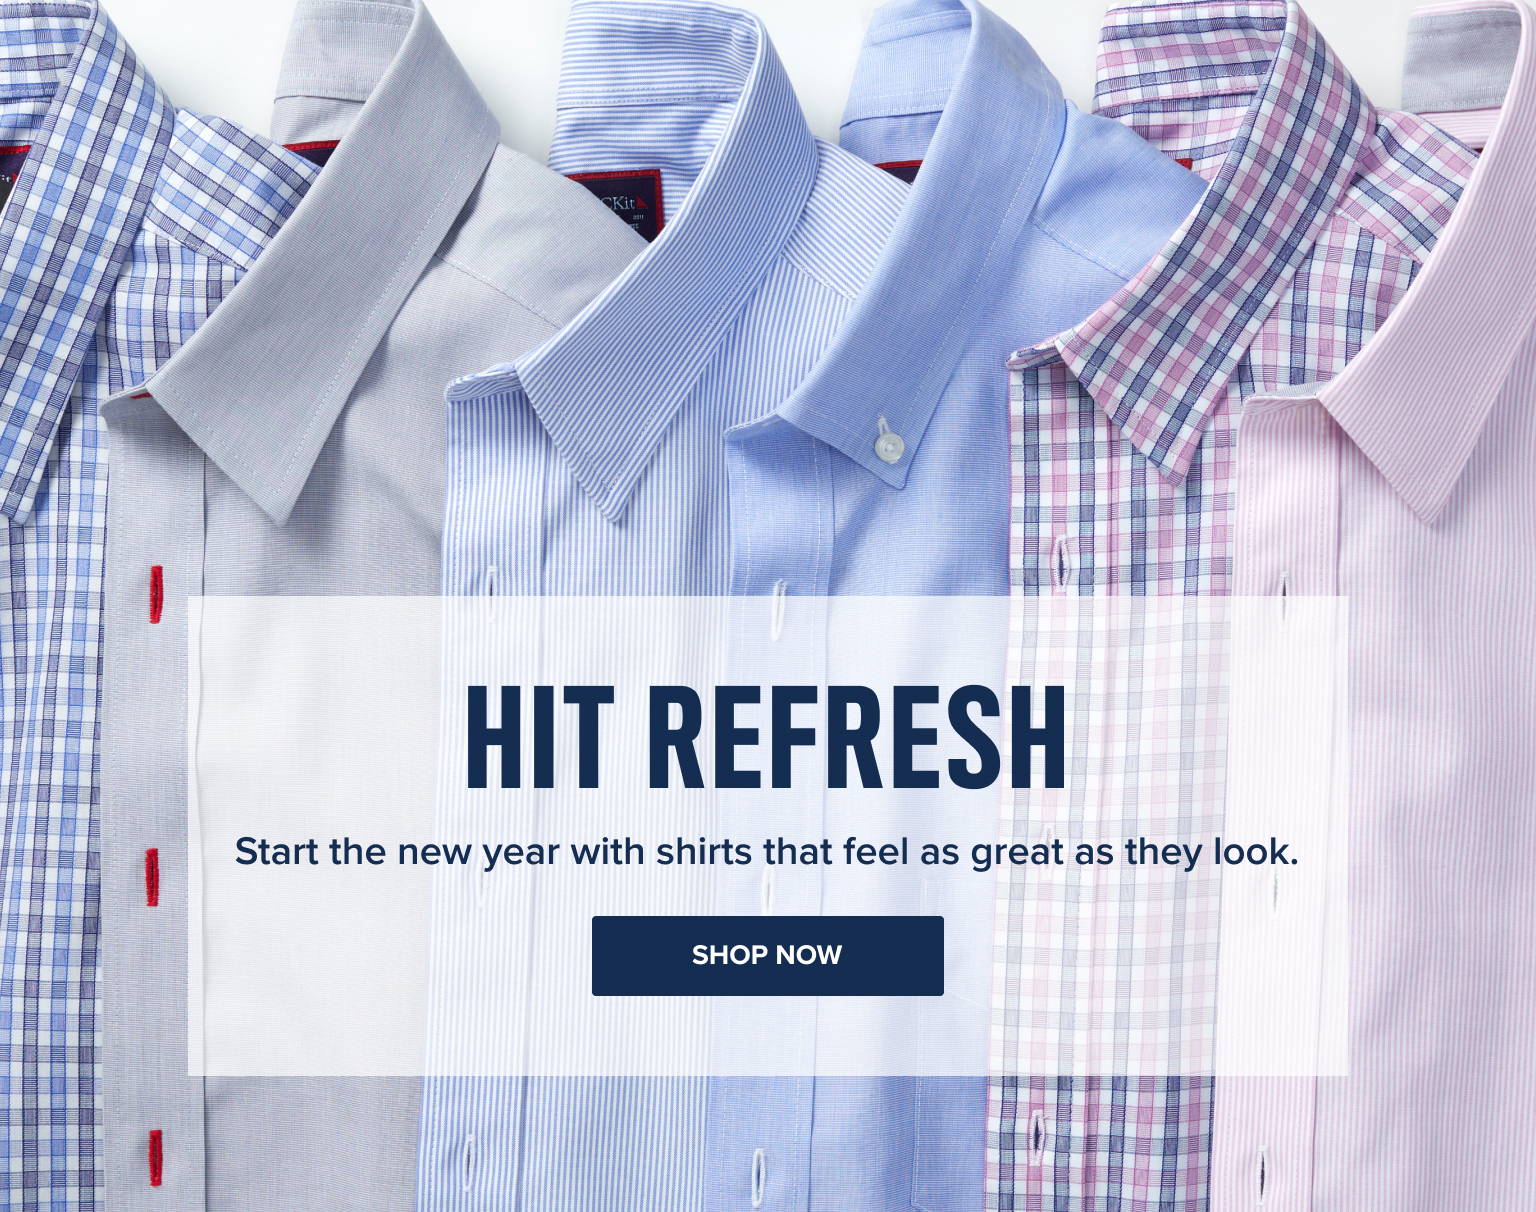 Hit the refresh. Start the new year with shirts that feel as great as they look.